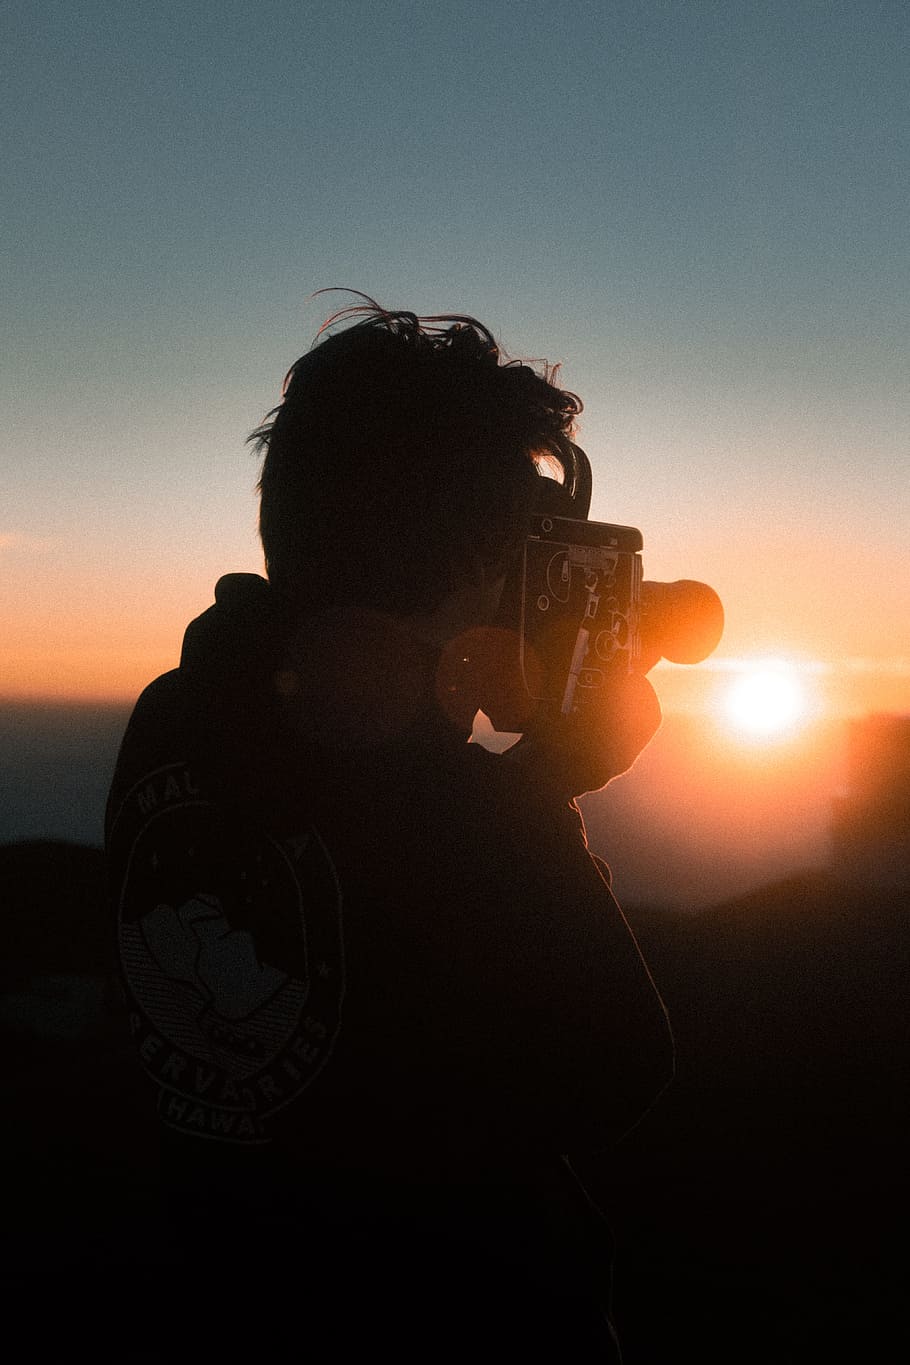 man holding classic camera during golden hour, sun, person, nature